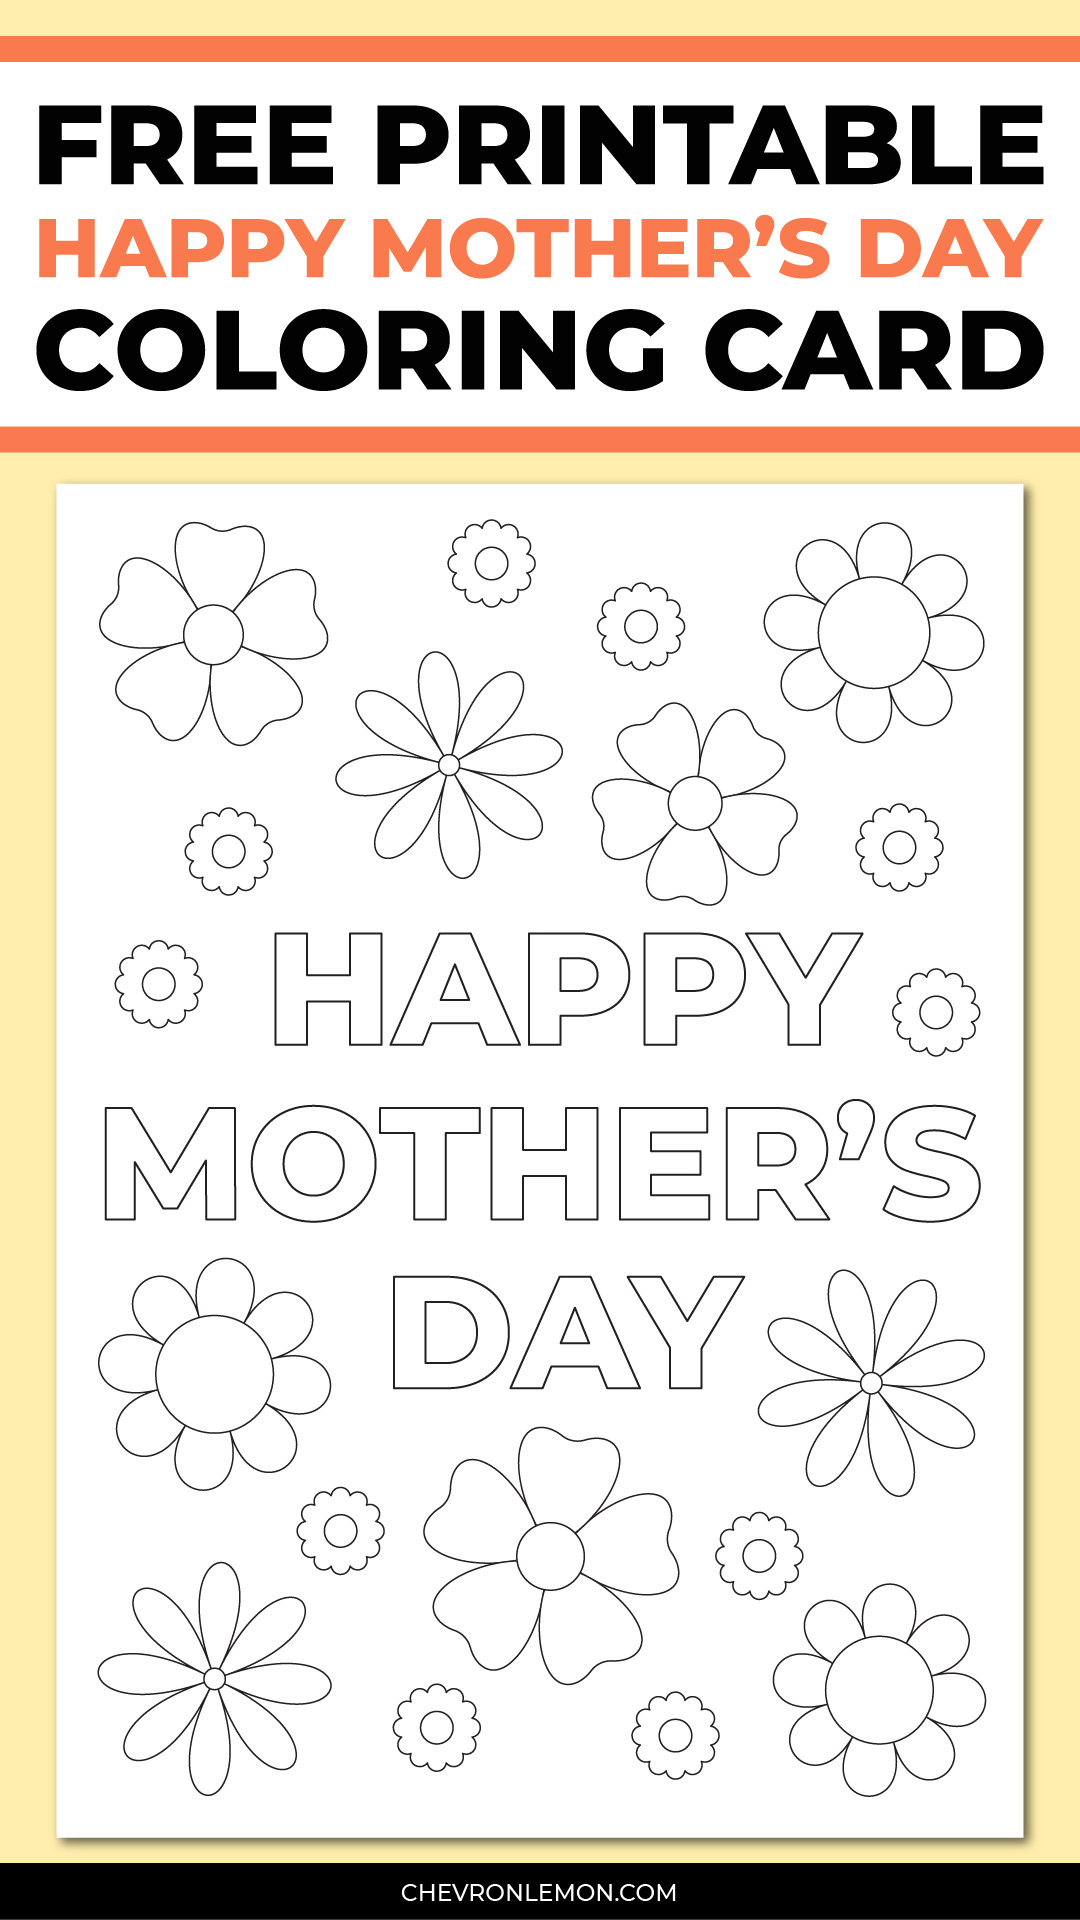 Happy Mother's Day coloring card